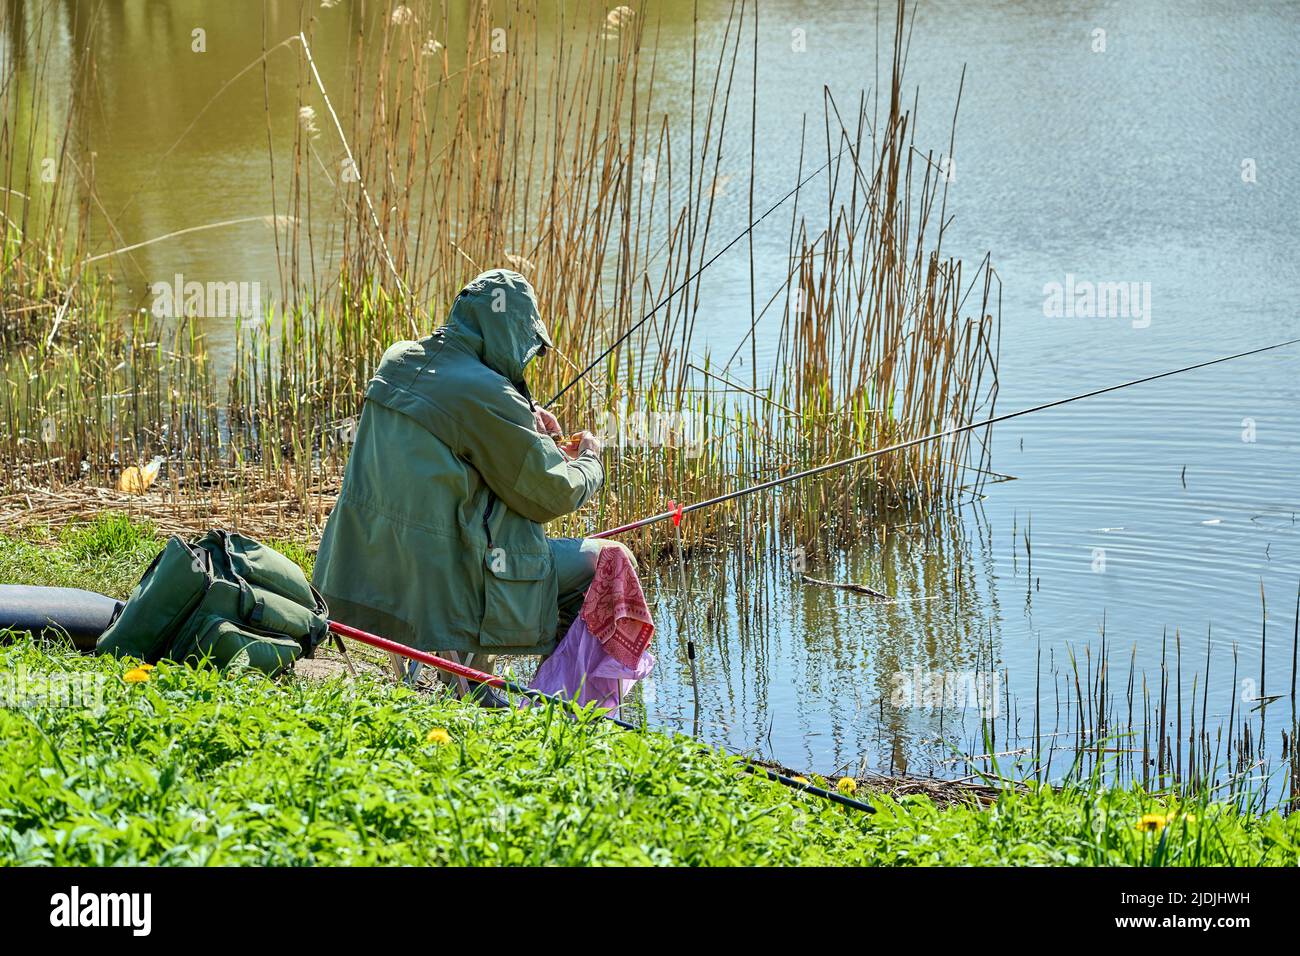 Riga, Latvia - May 8, 2022: A fisherman sits with a fishing rod on the shore of a lake in a public park. Green grass around. View from back. Stock Photo